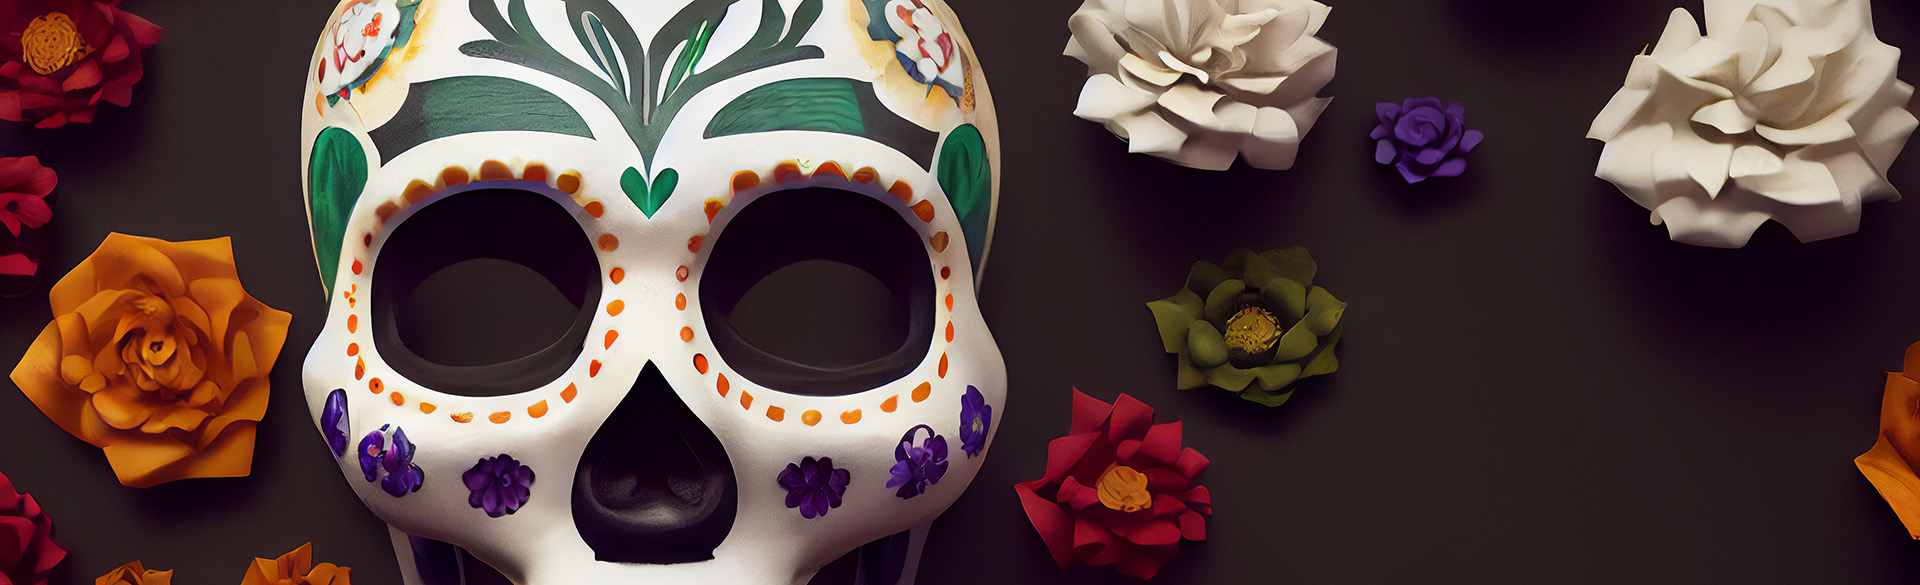 Decorated skull for Day of the Dead sits amid flowers